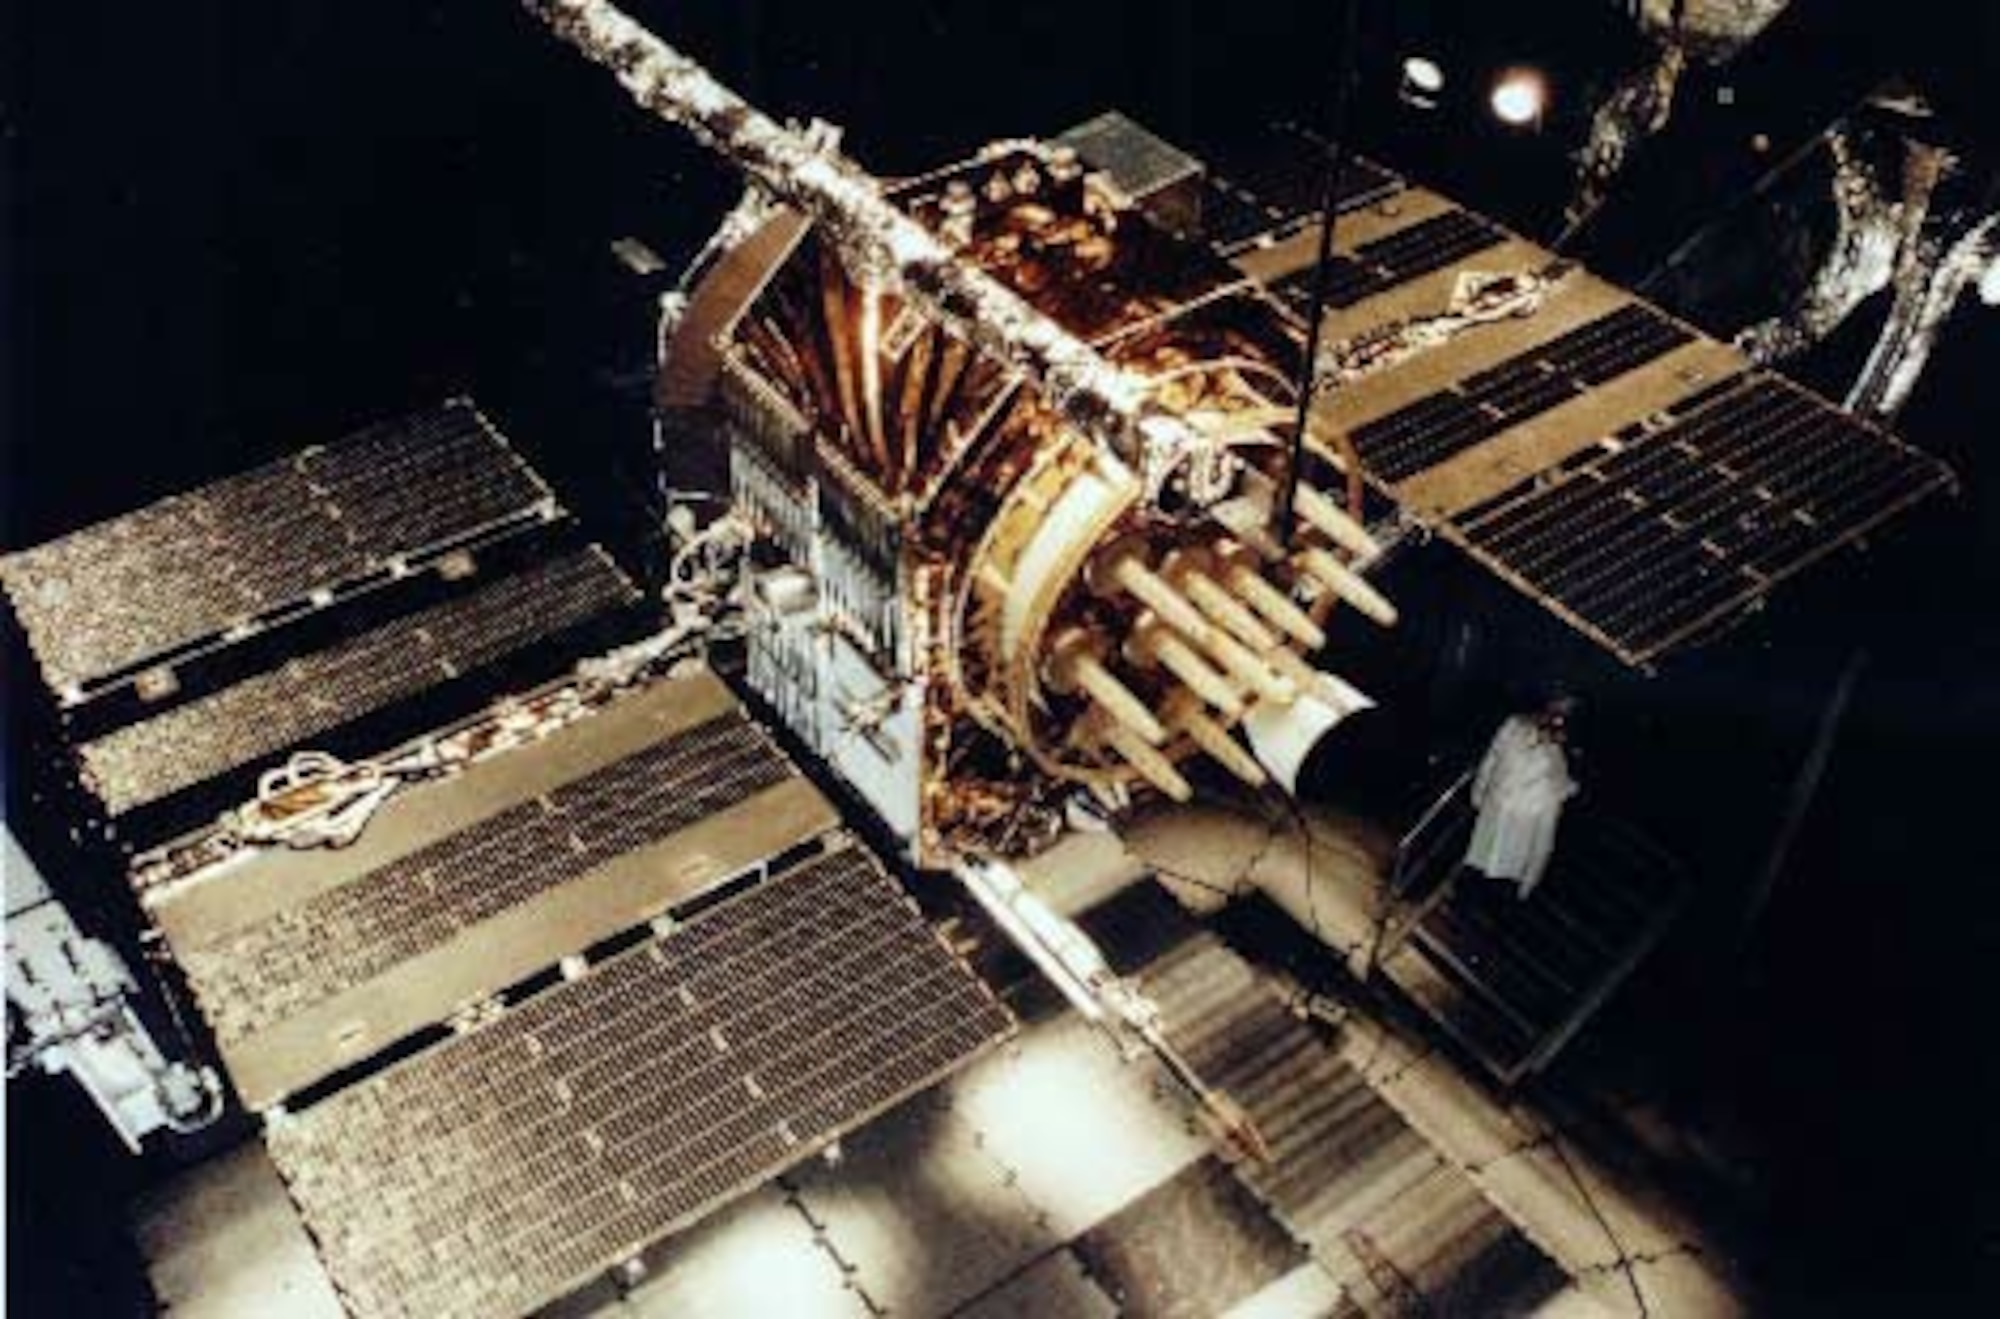 NAVSTAR Block II satellite, part of the Global Positioning System, undergoing Air Force testing. During Operation Desert Storm 16 NAVSTAR satellites were in orbit allowing receivers on the ground to have line of sight to at least three satellites enabling triangulation of position.